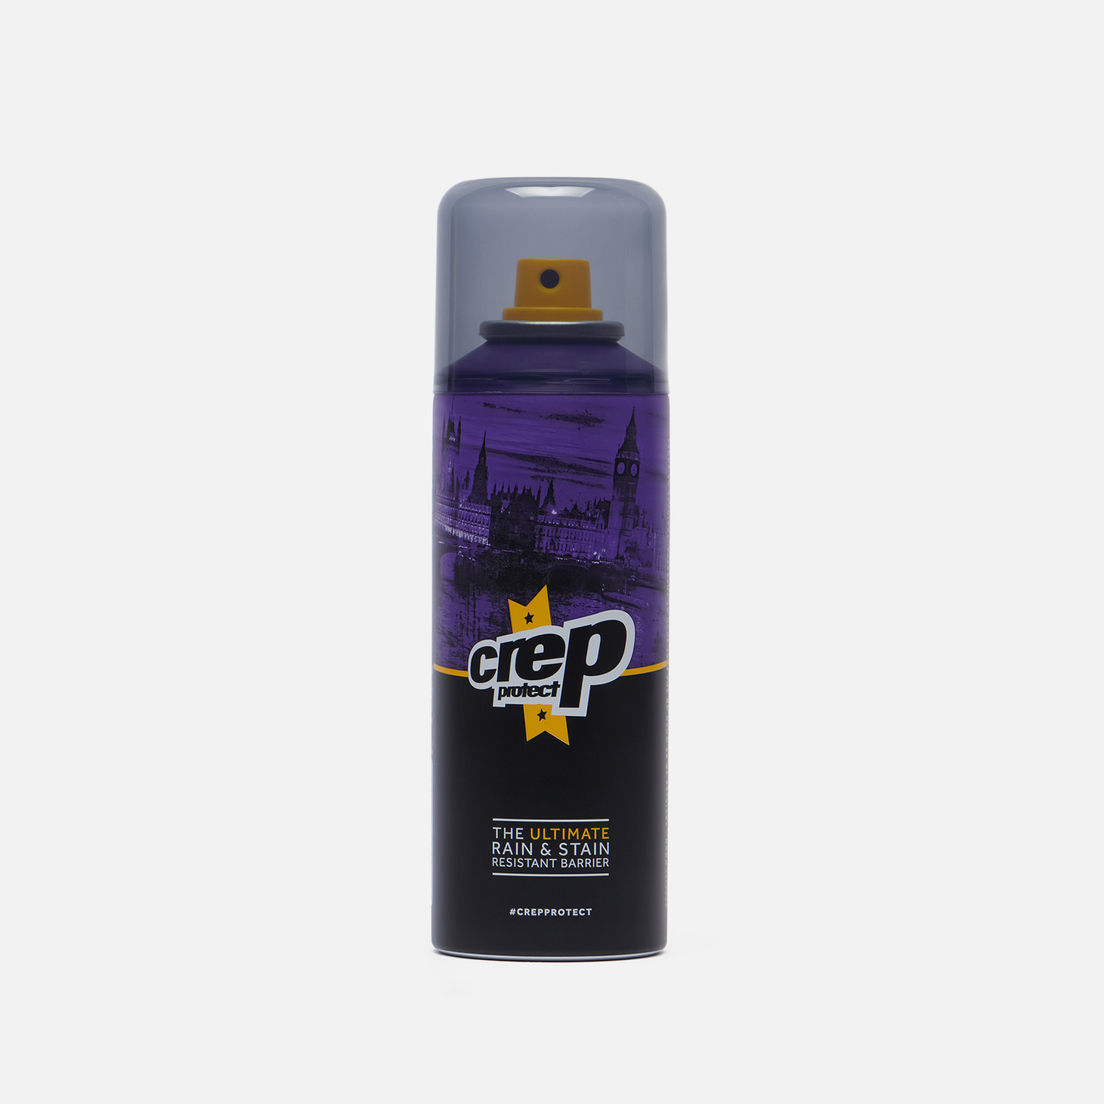 crep protect rain and stain